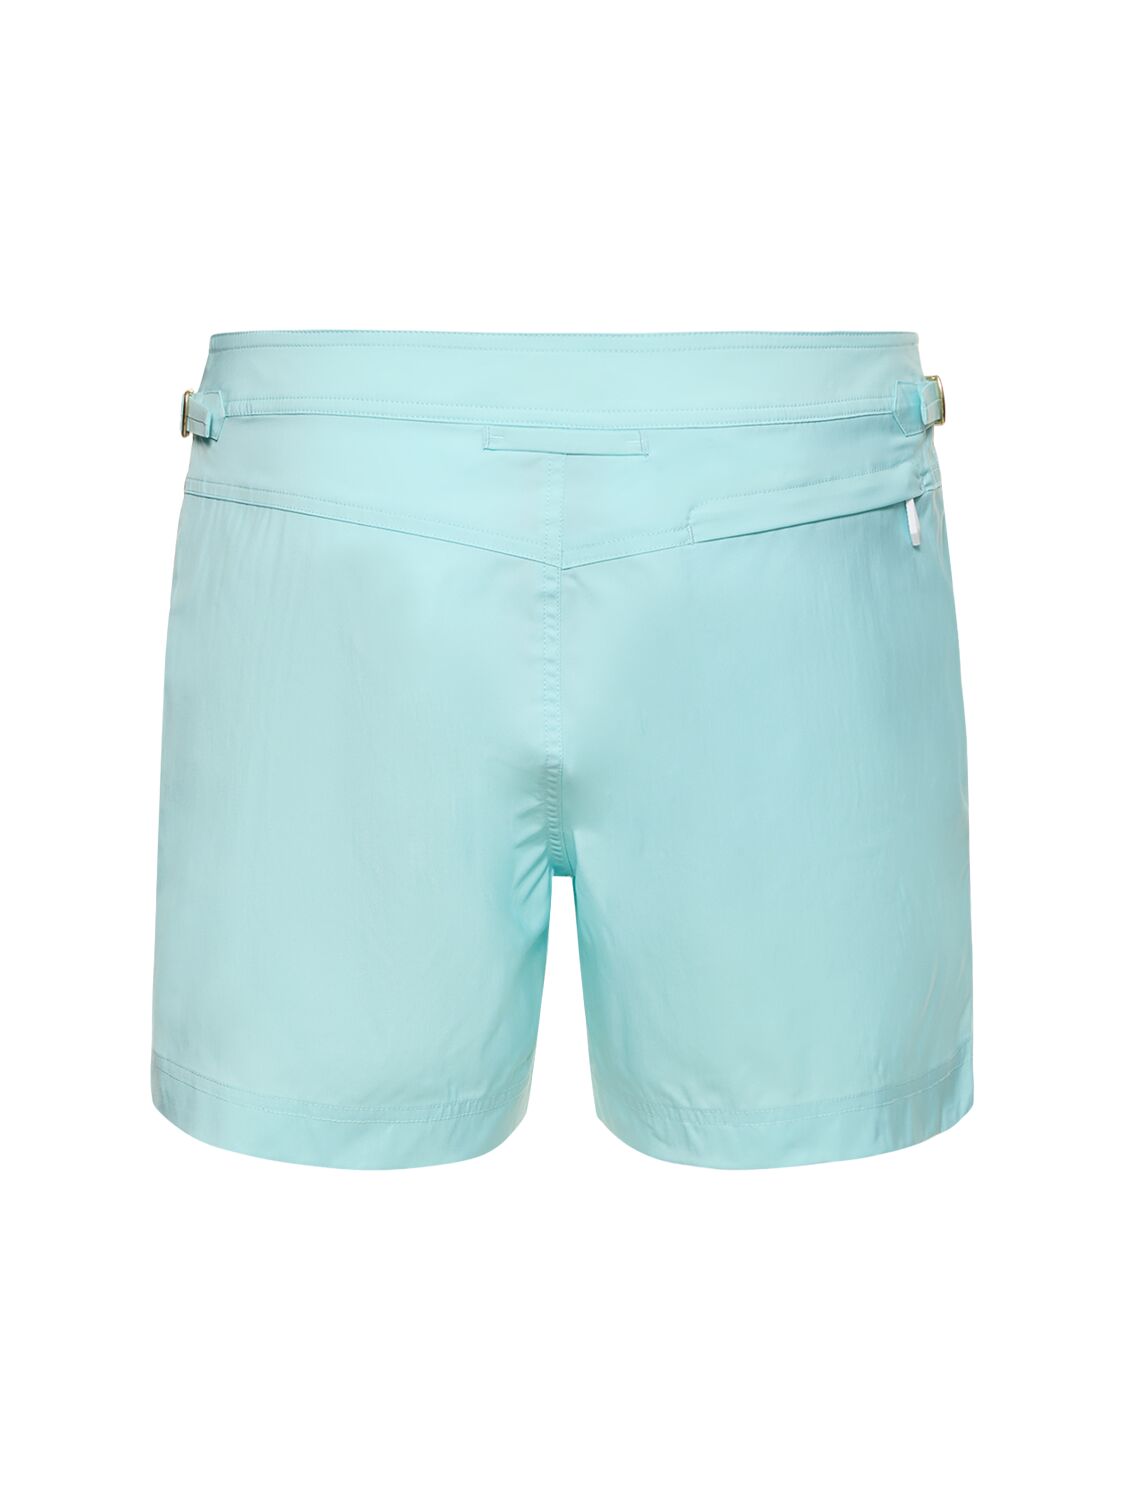 Shop Tom Ford Compact Poplin Swim Shorts W/ Piping In Porcelain Blue